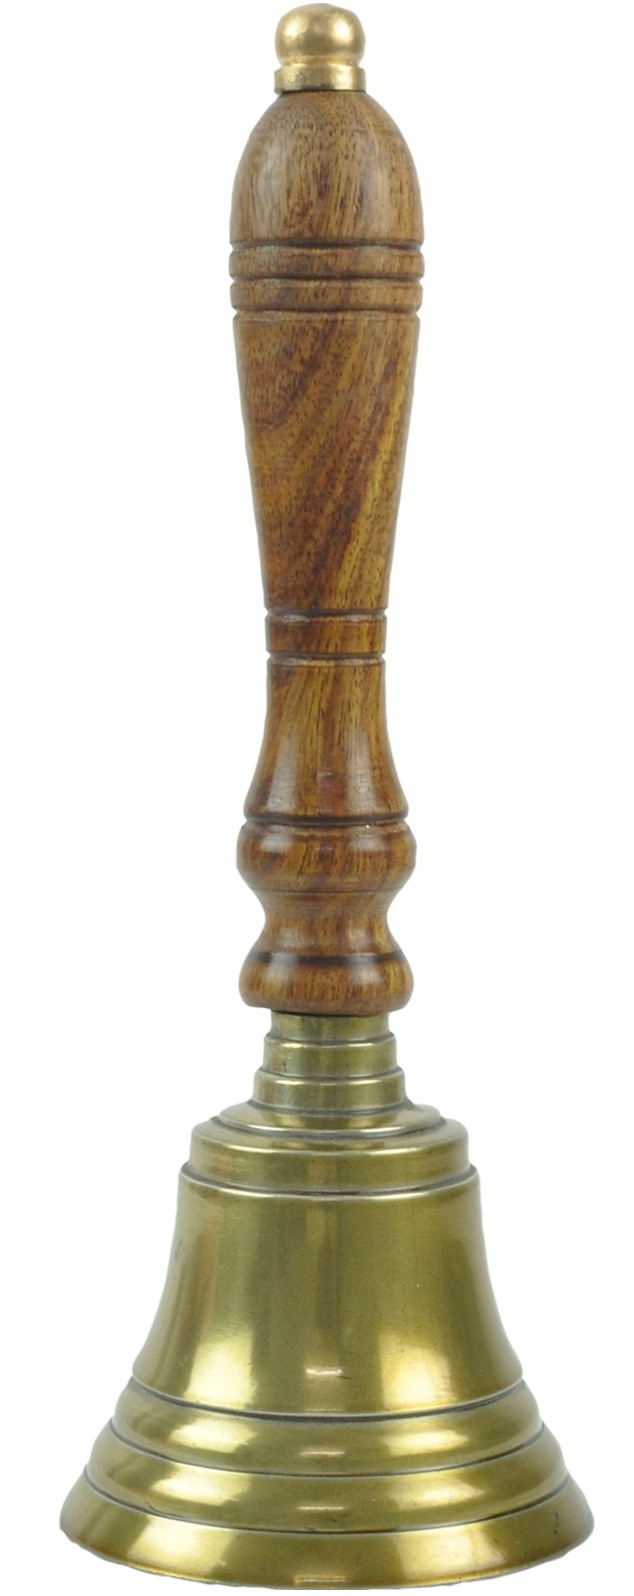 Bell With Wooden Handle (Brass Antique Finish) - 41cm